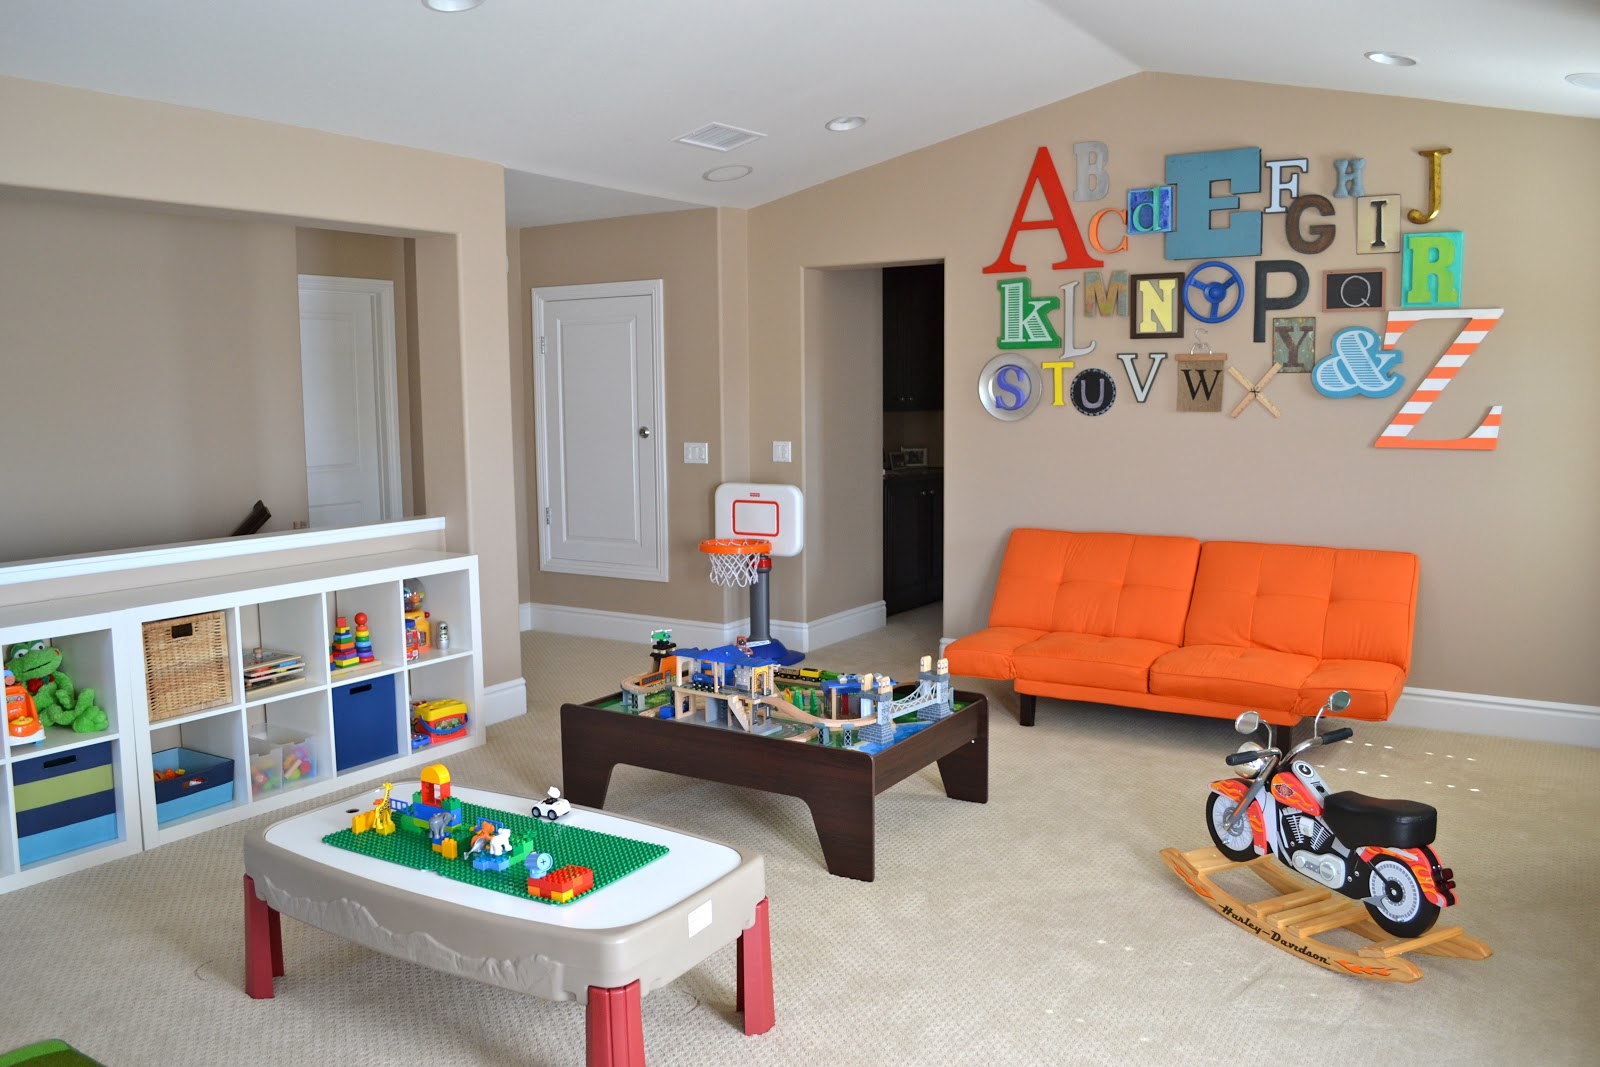 Kids Chat Orange Dazzling Kids Chat Rooms With Orange Loveseat And Glass Table Decorated With Wall Decorations And Furnished With White Cabinet For Toys Storage Kids Room Design And Furniture Of Kids Chat Rooms